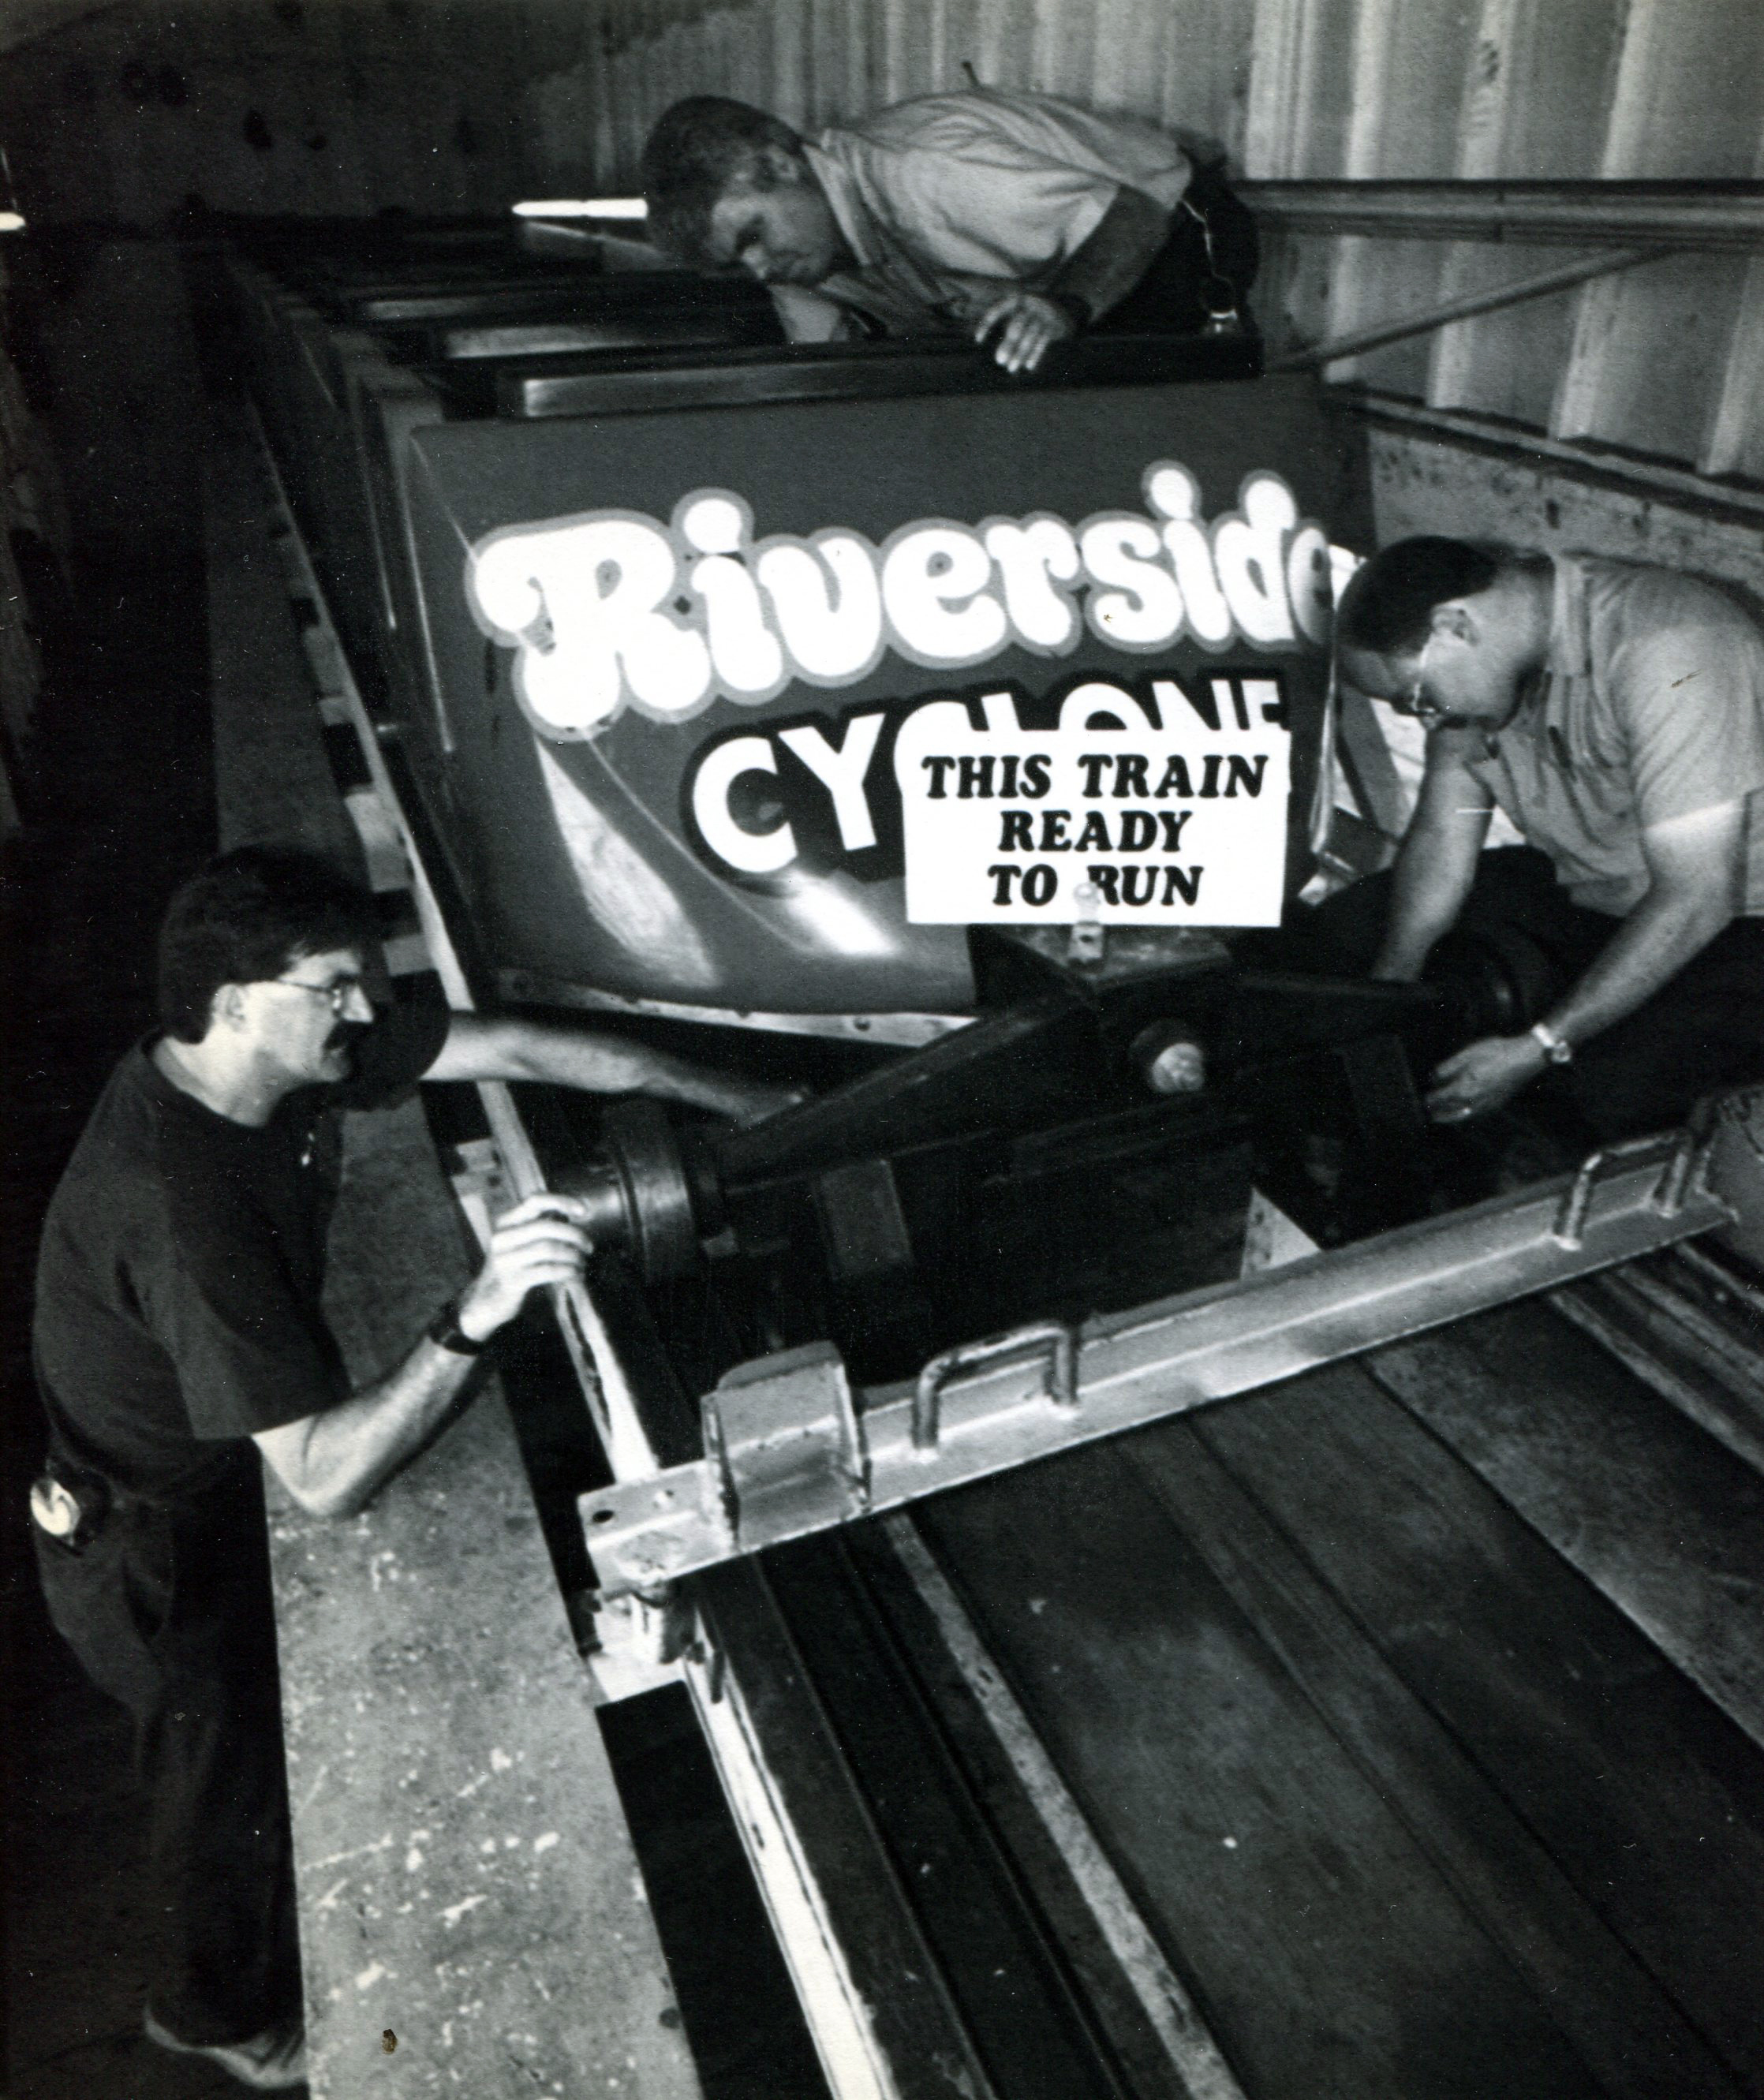 July 6, 1995 - Agawam - From left, Al Morneau, Roch Picard and Don Donahue inspect the lap bar and running gear of one of the trains for the Cyclone at Riverside Park. (Republican file photo) Staff-Shot